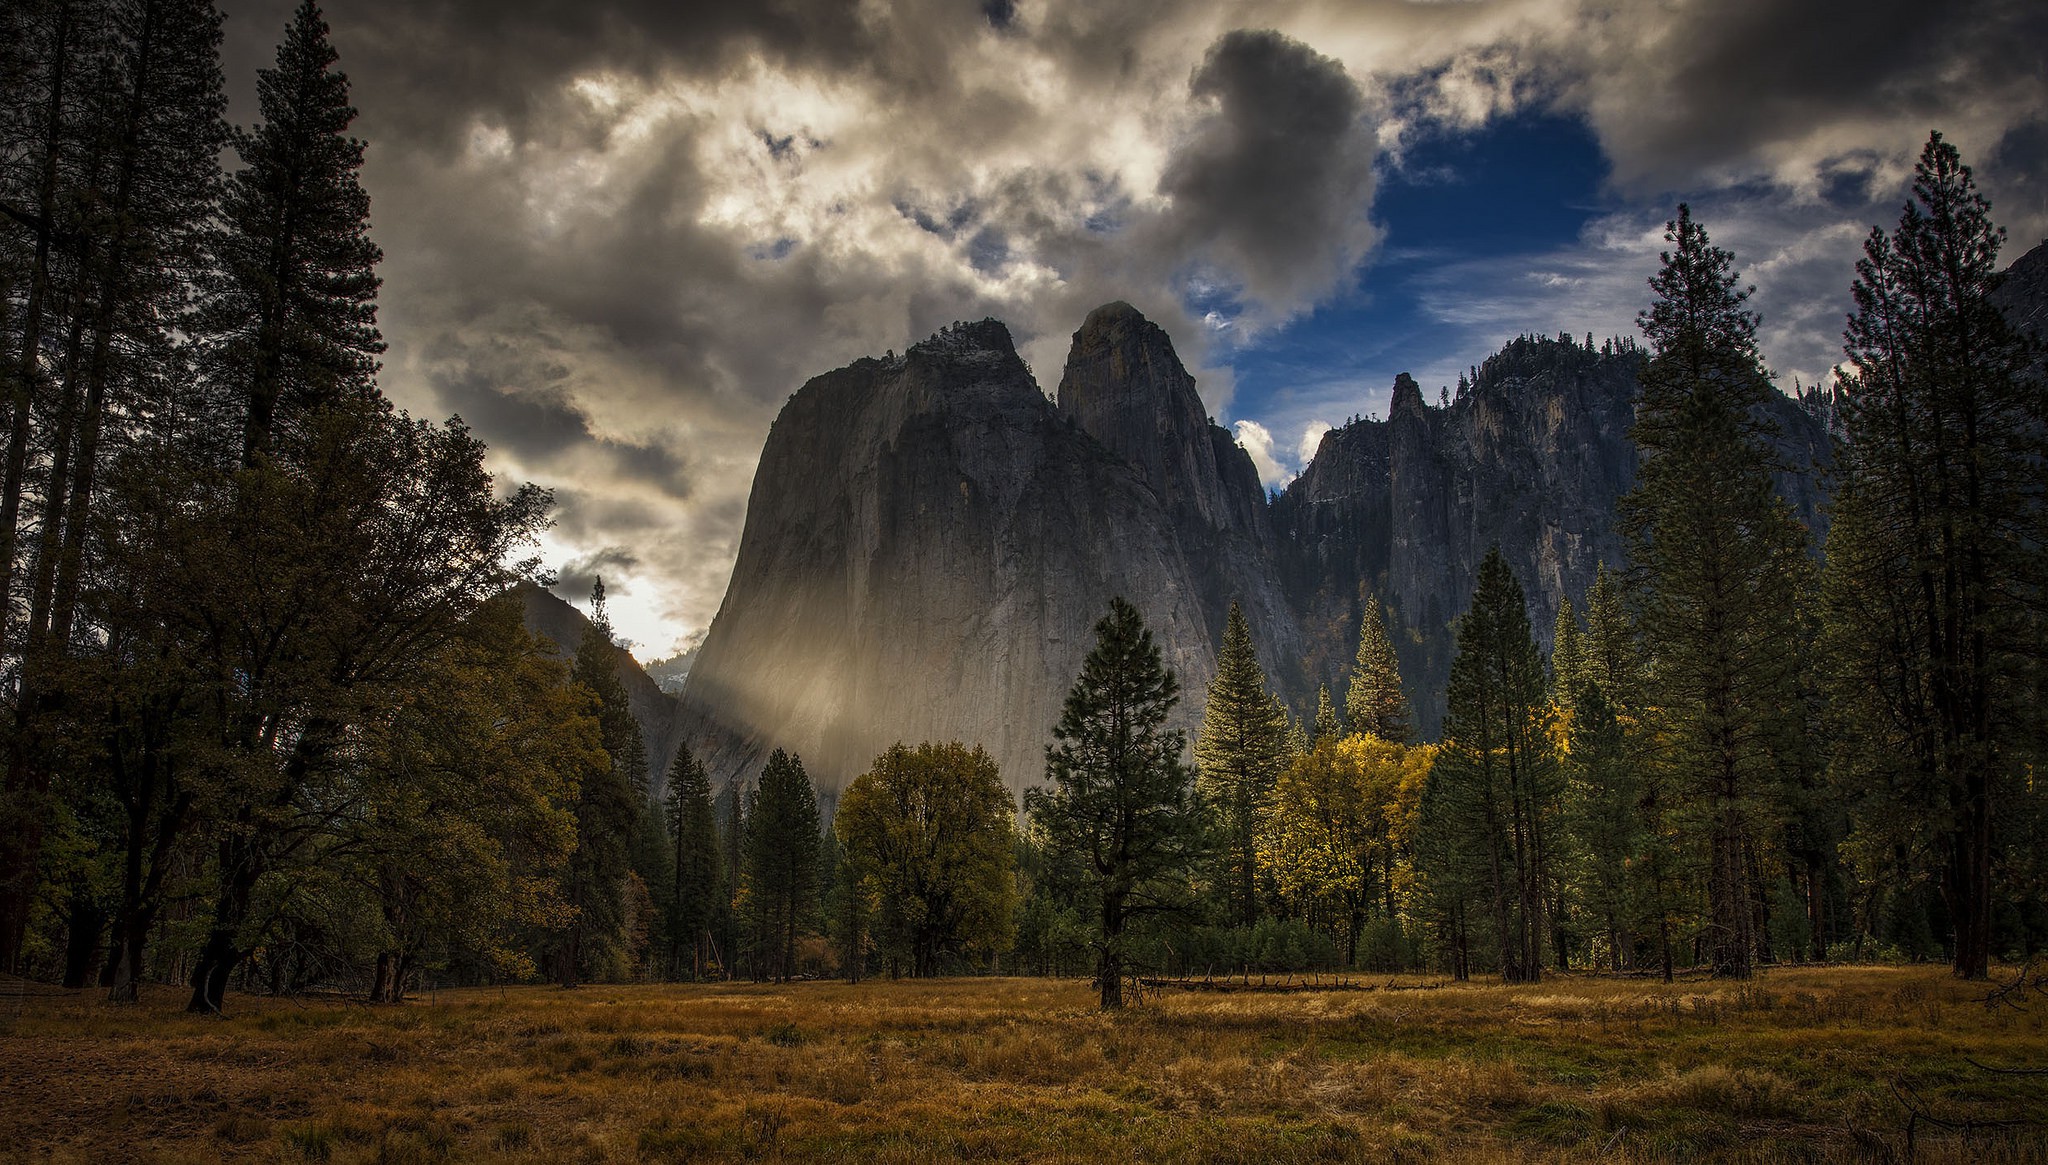 nature, Landscape, Mountain, Yosemite National Park, USA, Trees, Forest, Sunlight, Clouds, Field, Grass, HDR Wallpaper